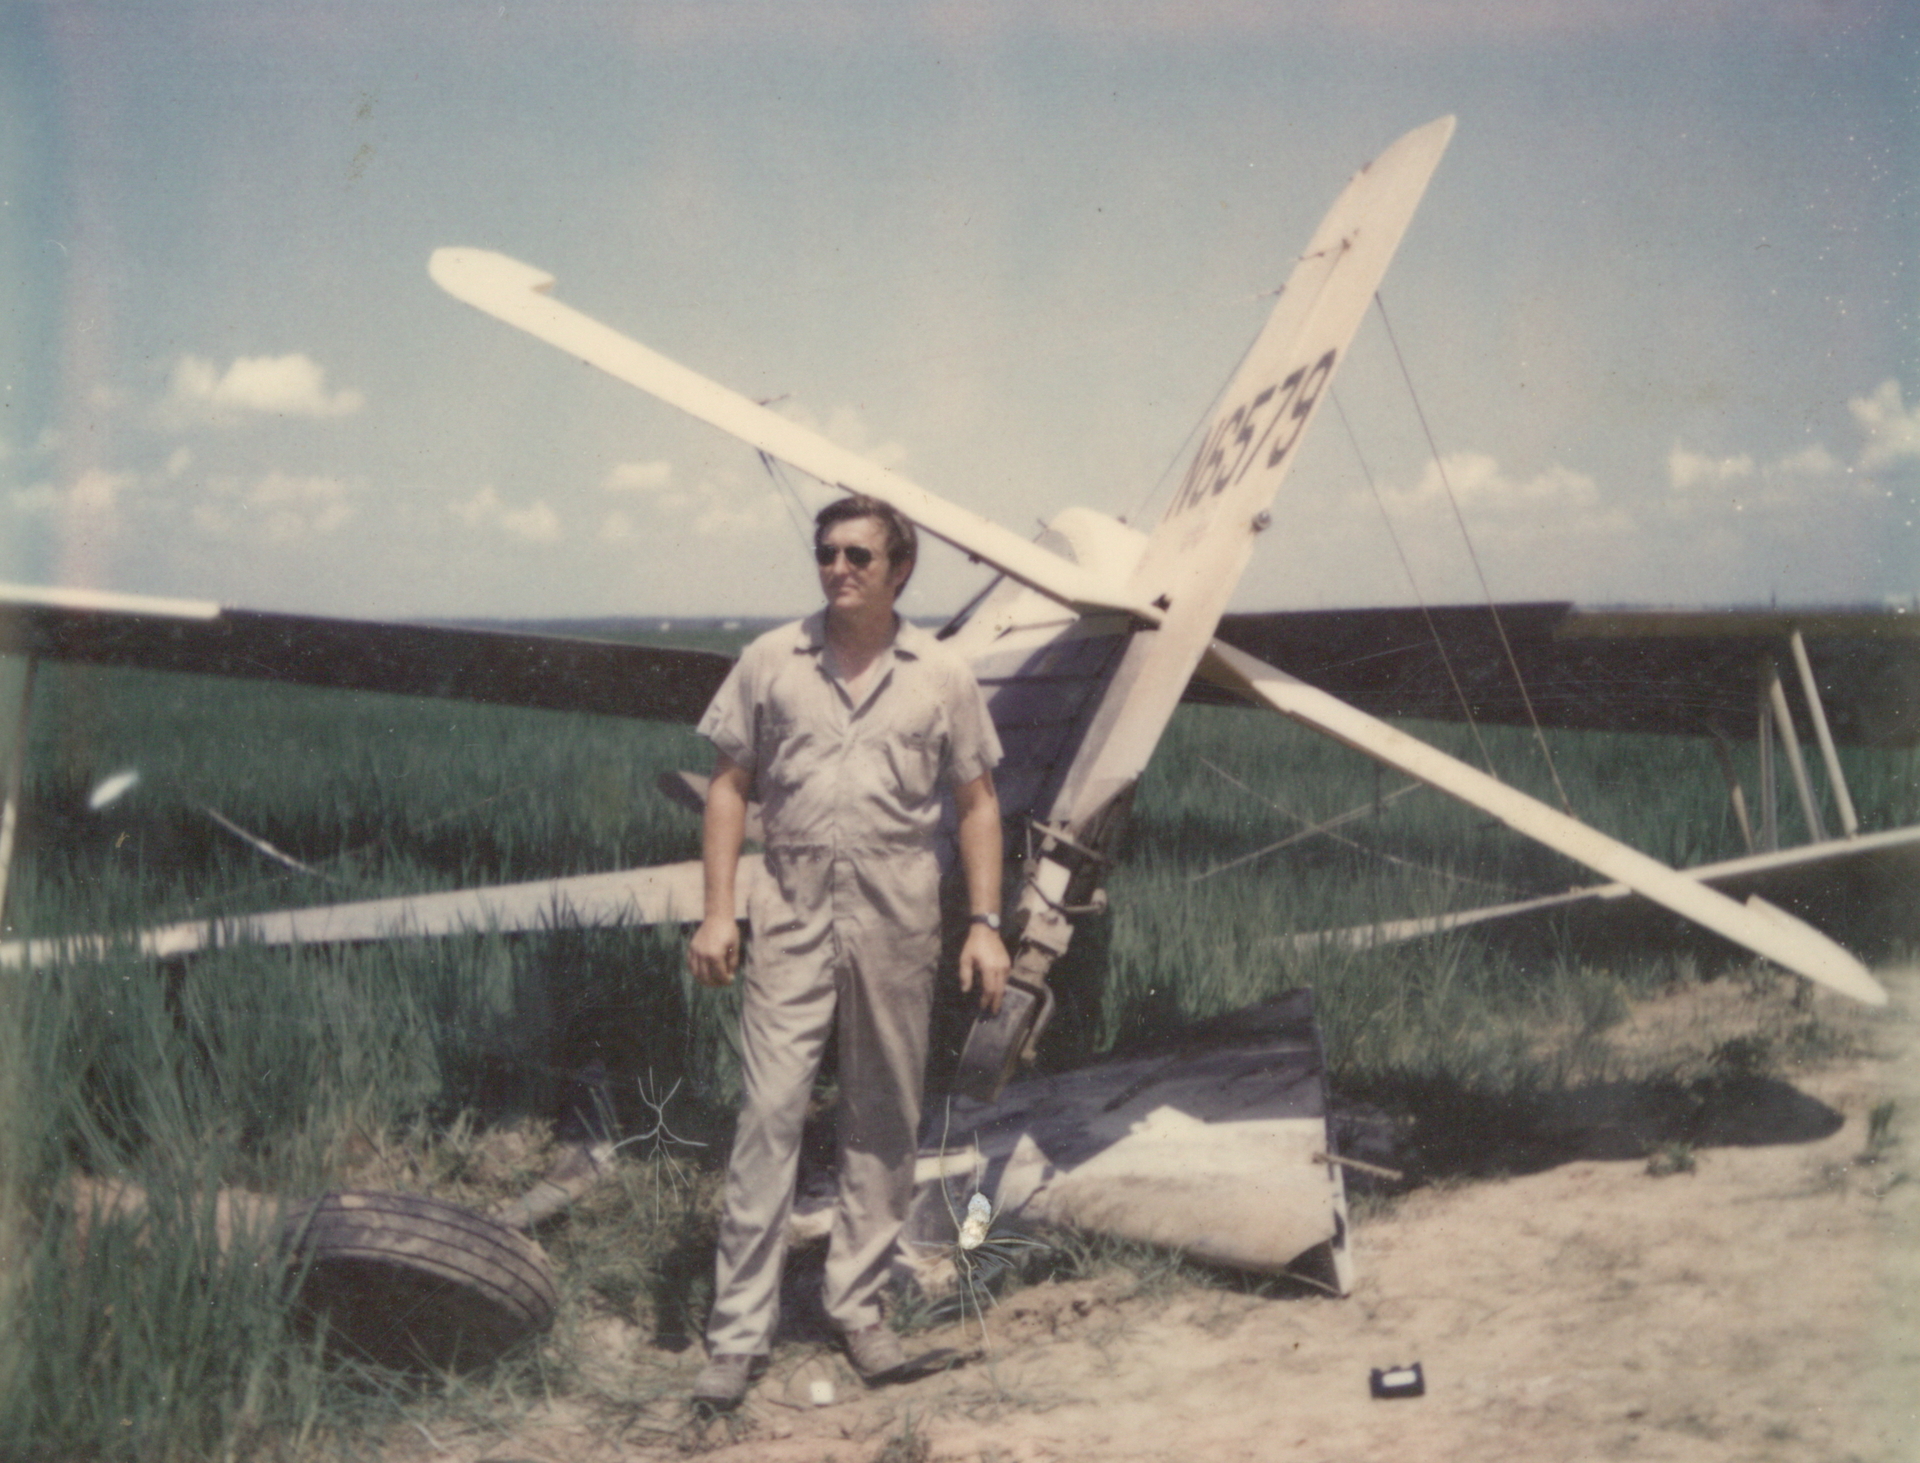 Gary Betzner, the subject of the HBO docuseries 'The Invisible Pilot,' wearing sunglasses and standing in front of a crashed plane.